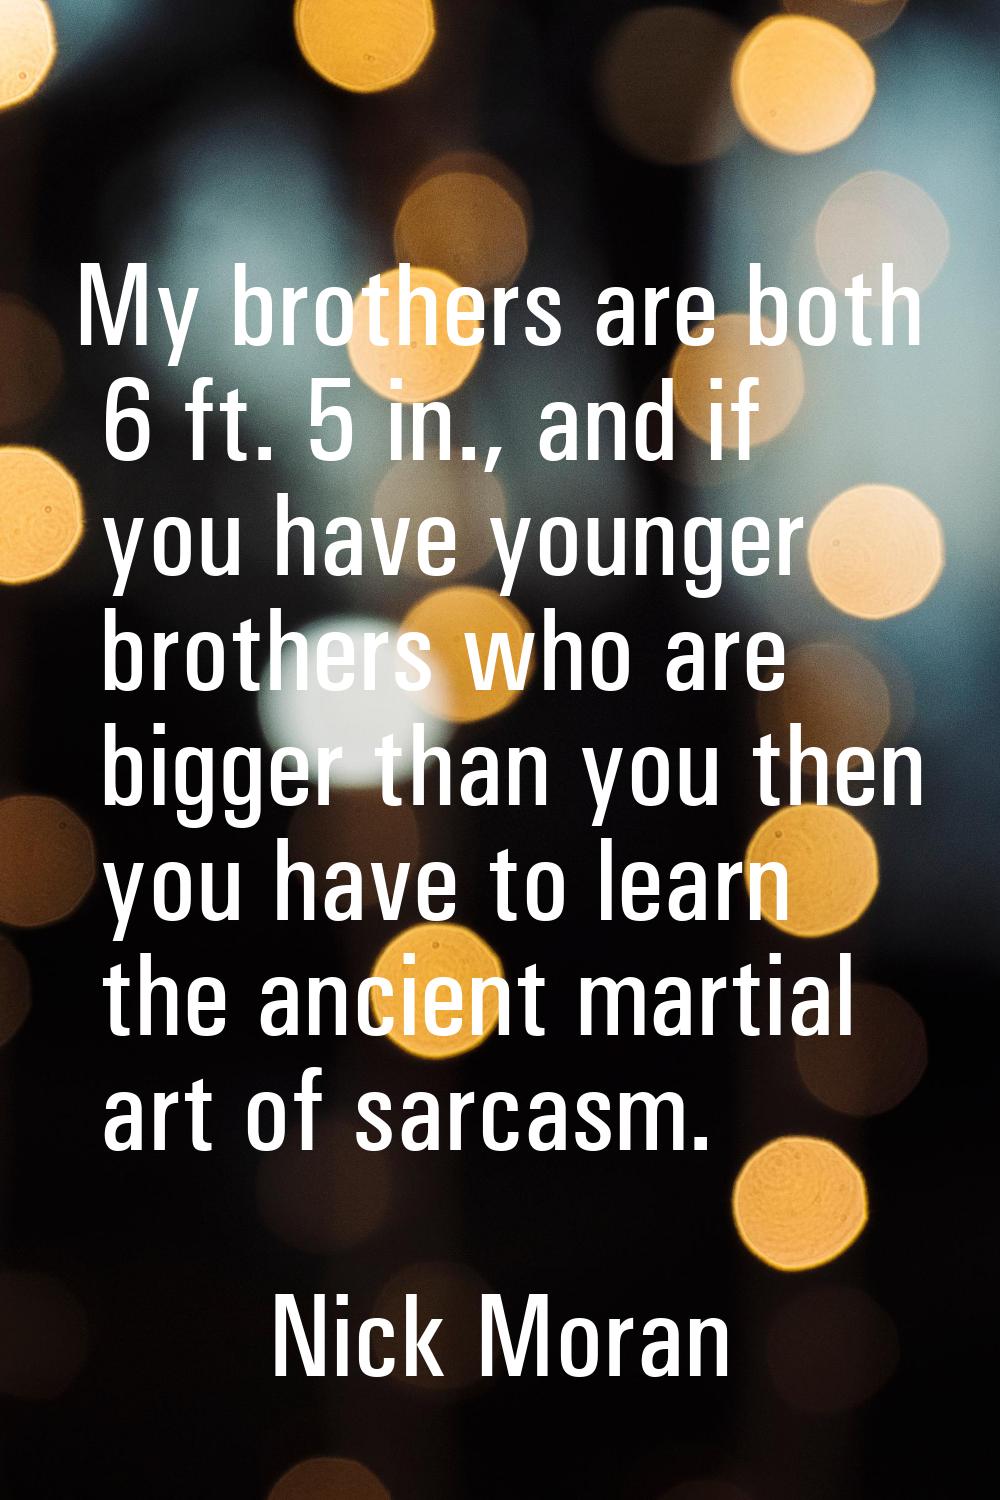 My brothers are both 6 ft. 5 in., and if you have younger brothers who are bigger than you then you